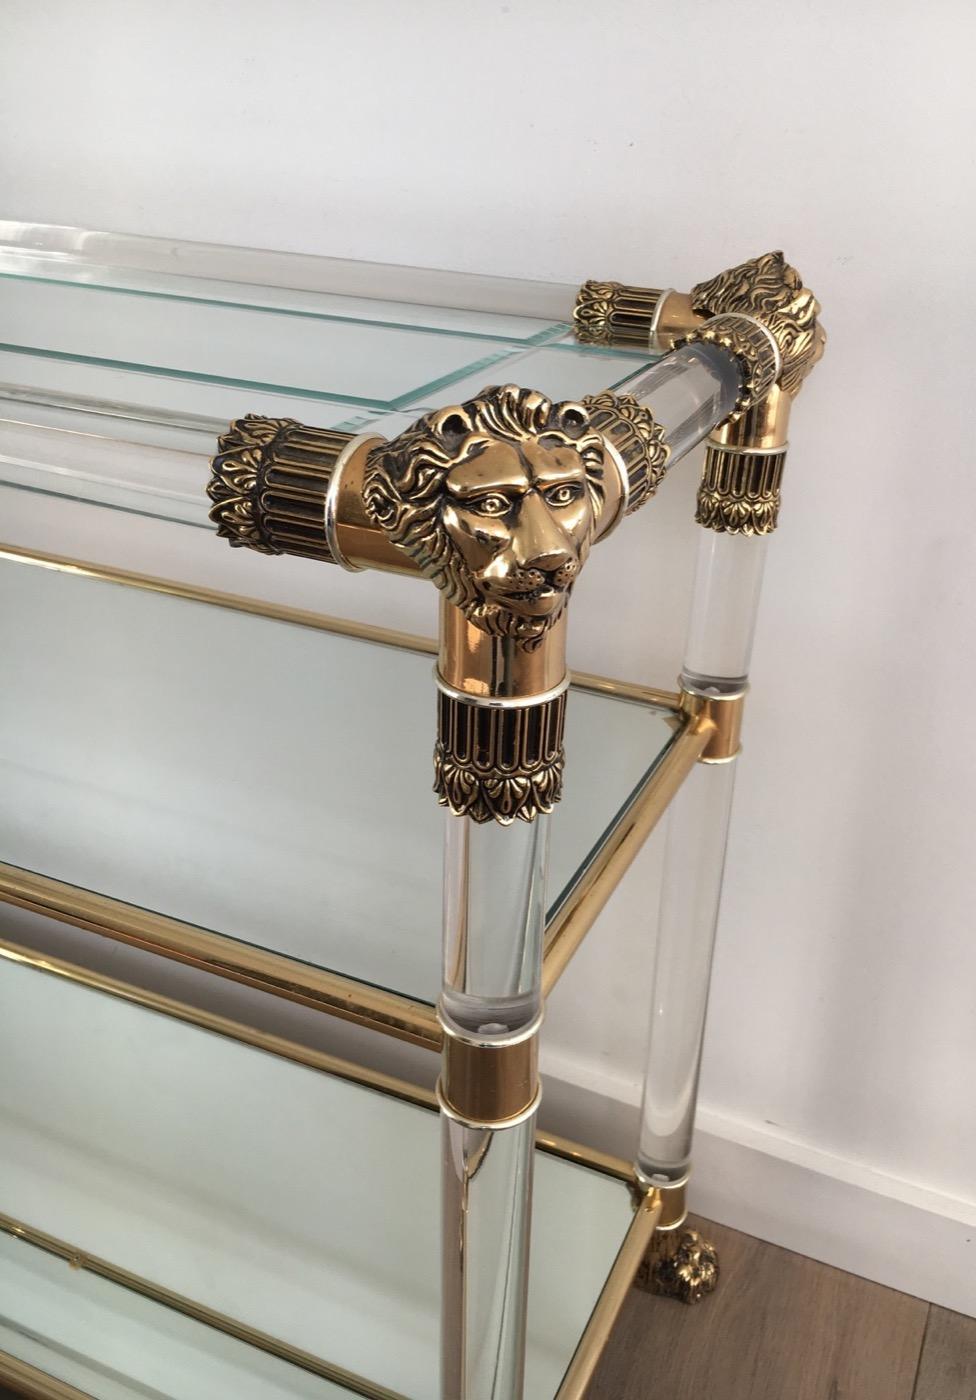 Mid-Century Modern Lucite Console Table with Gild Lion Heads and Claw Feet, French, circa 1970